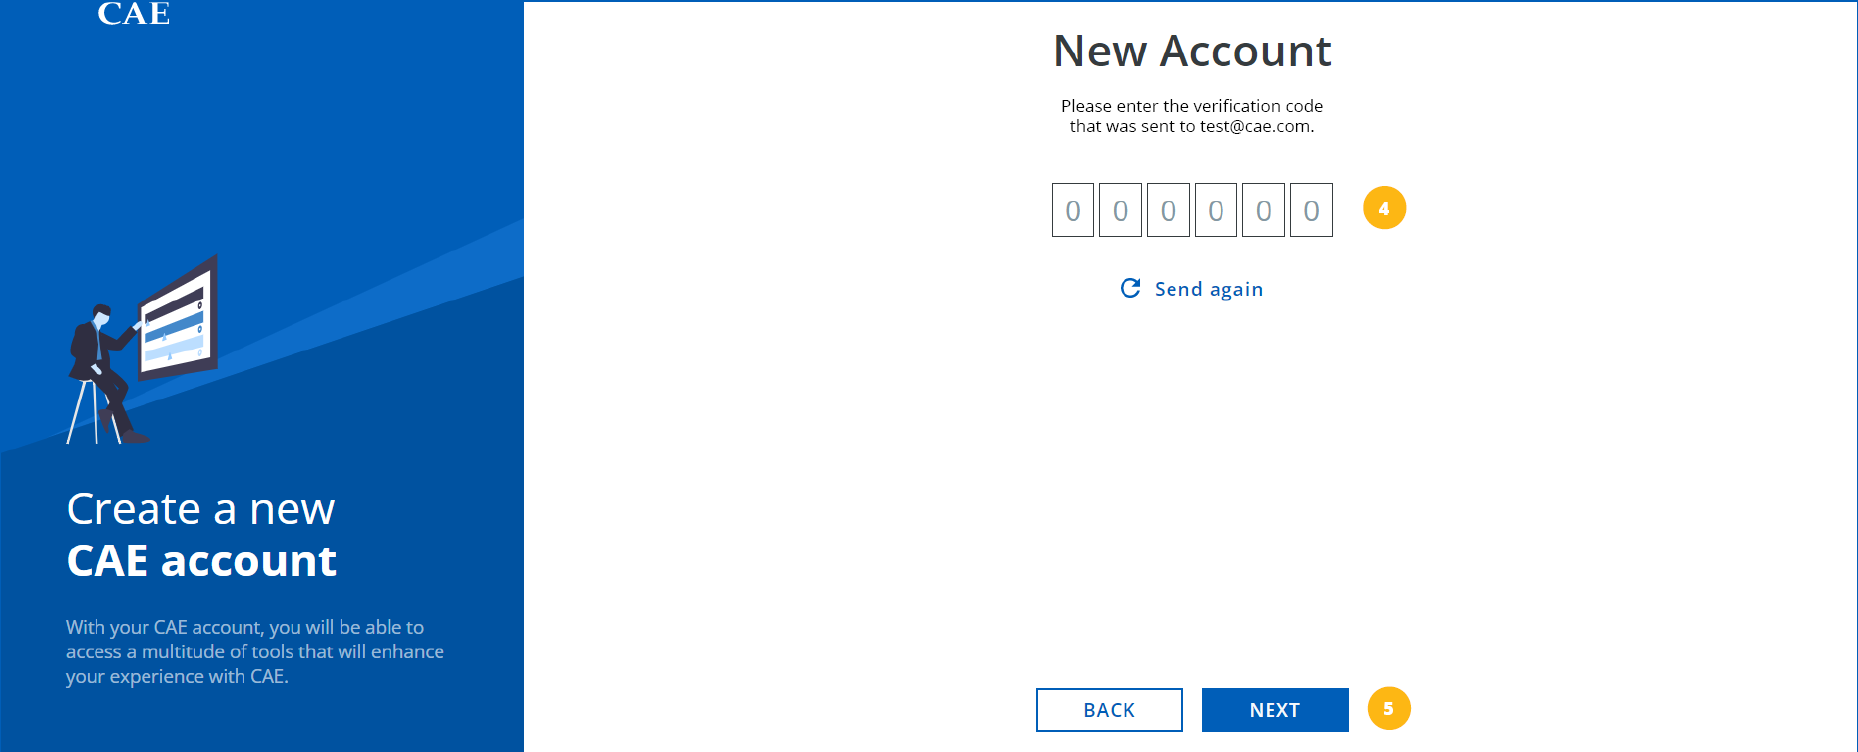 CAEAccount_02_Creating_a_New_Account_02.png